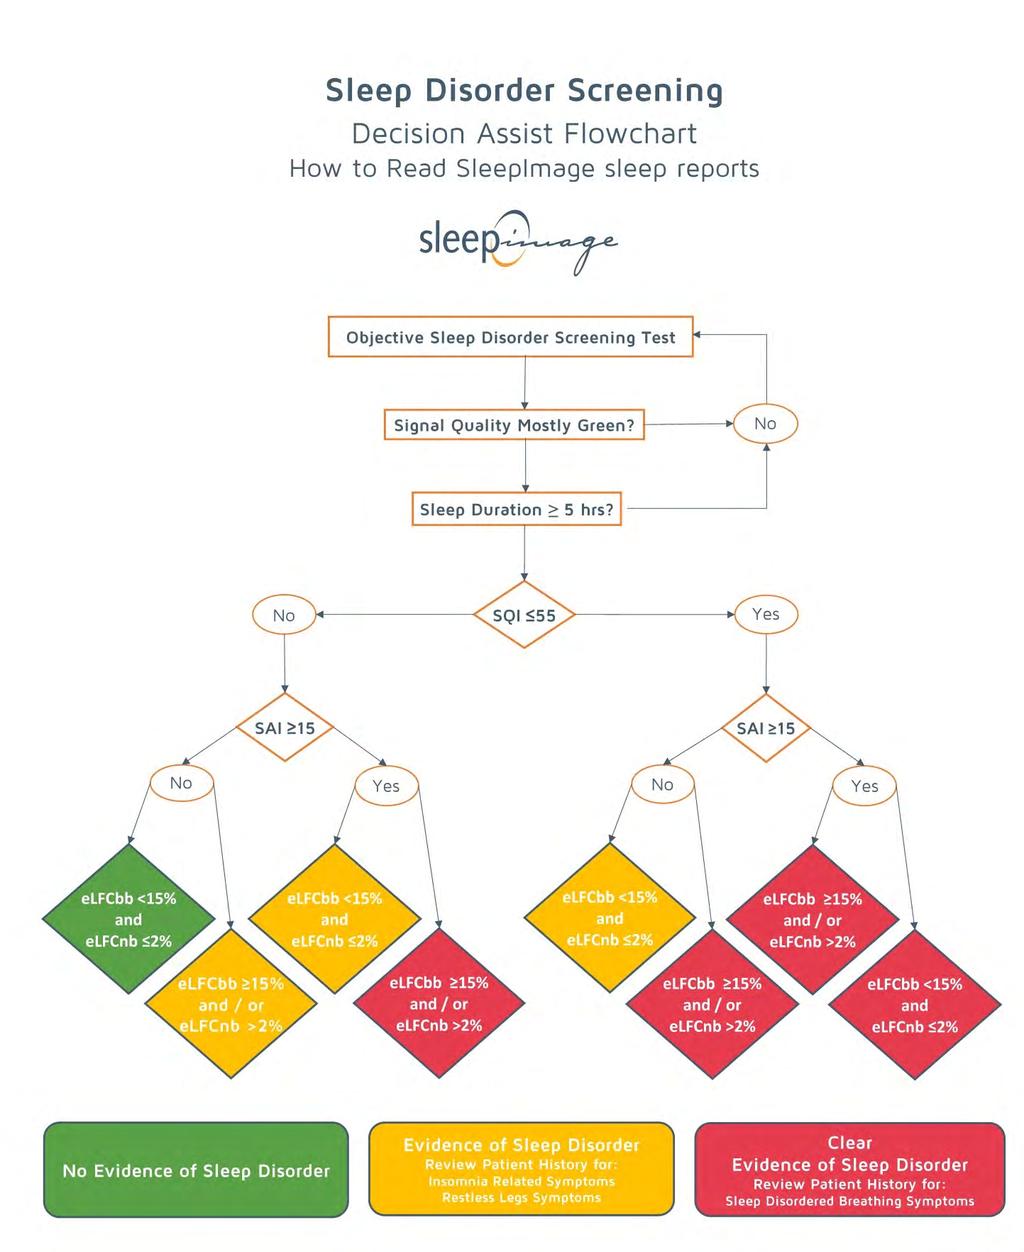 Decision Assist Flowchart Disclaimer: This Flowchart is intended to assist clinicians to evaluate sleep quality and screen for